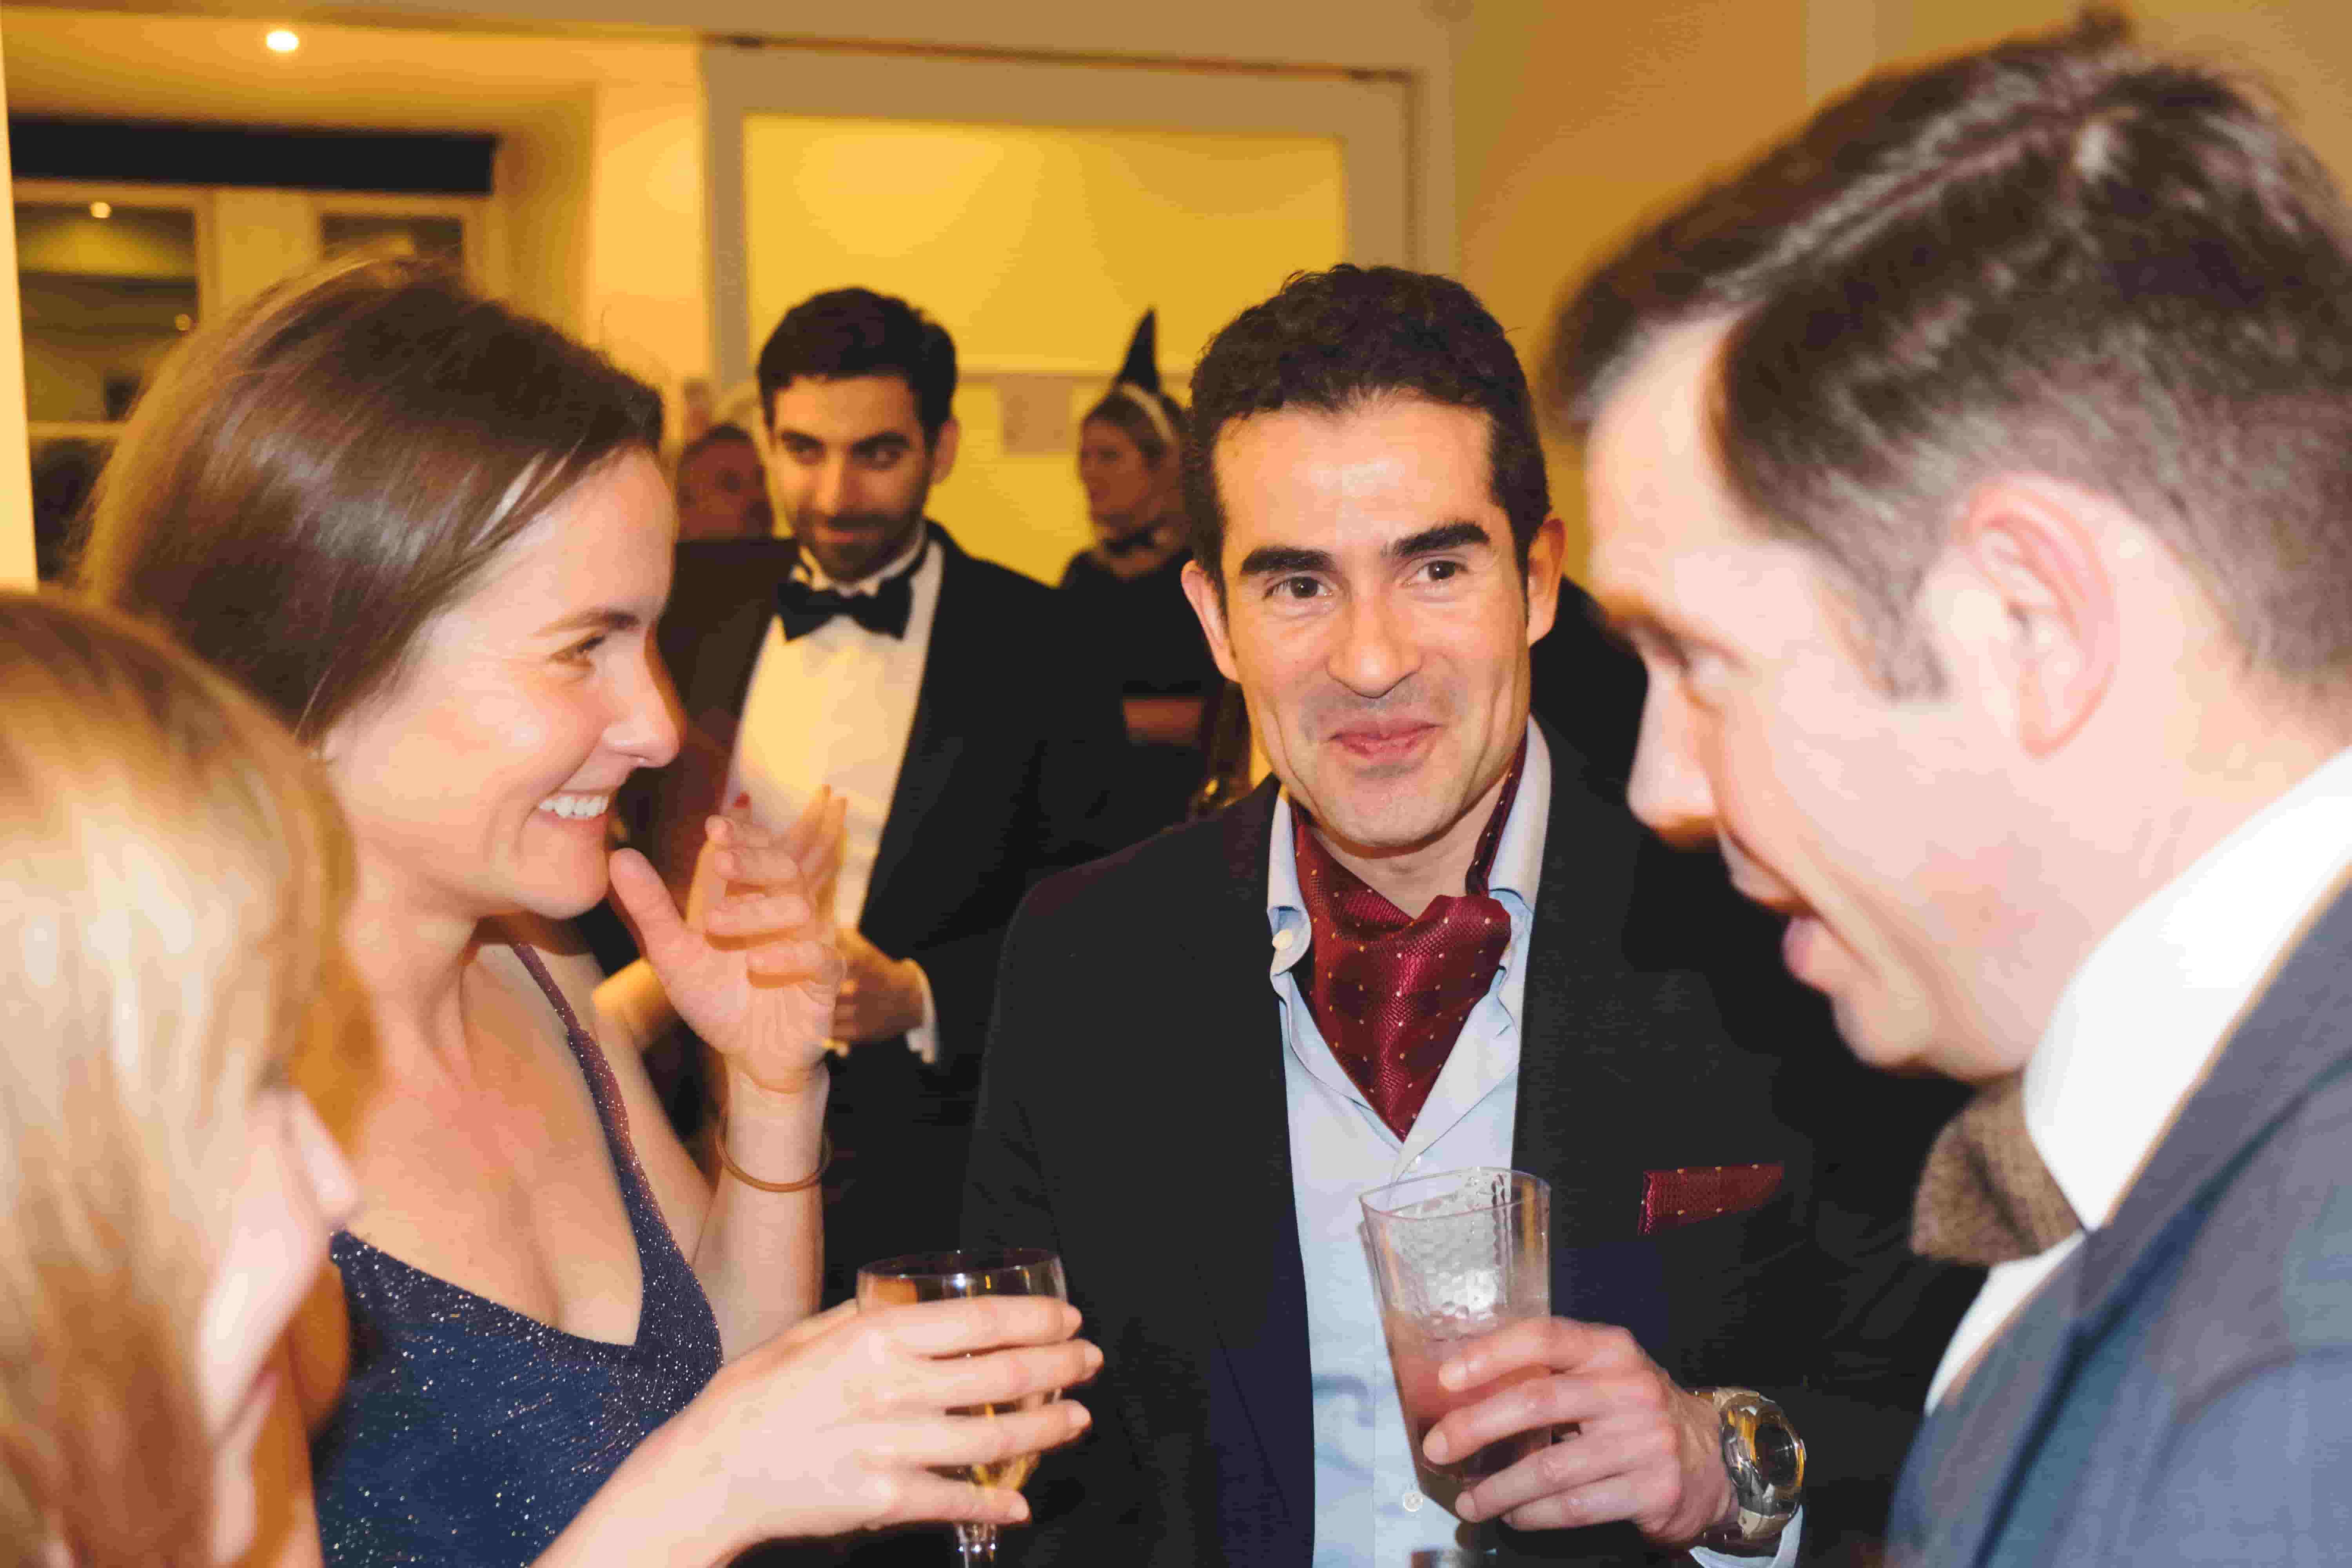 Hire a magician for a christmas party